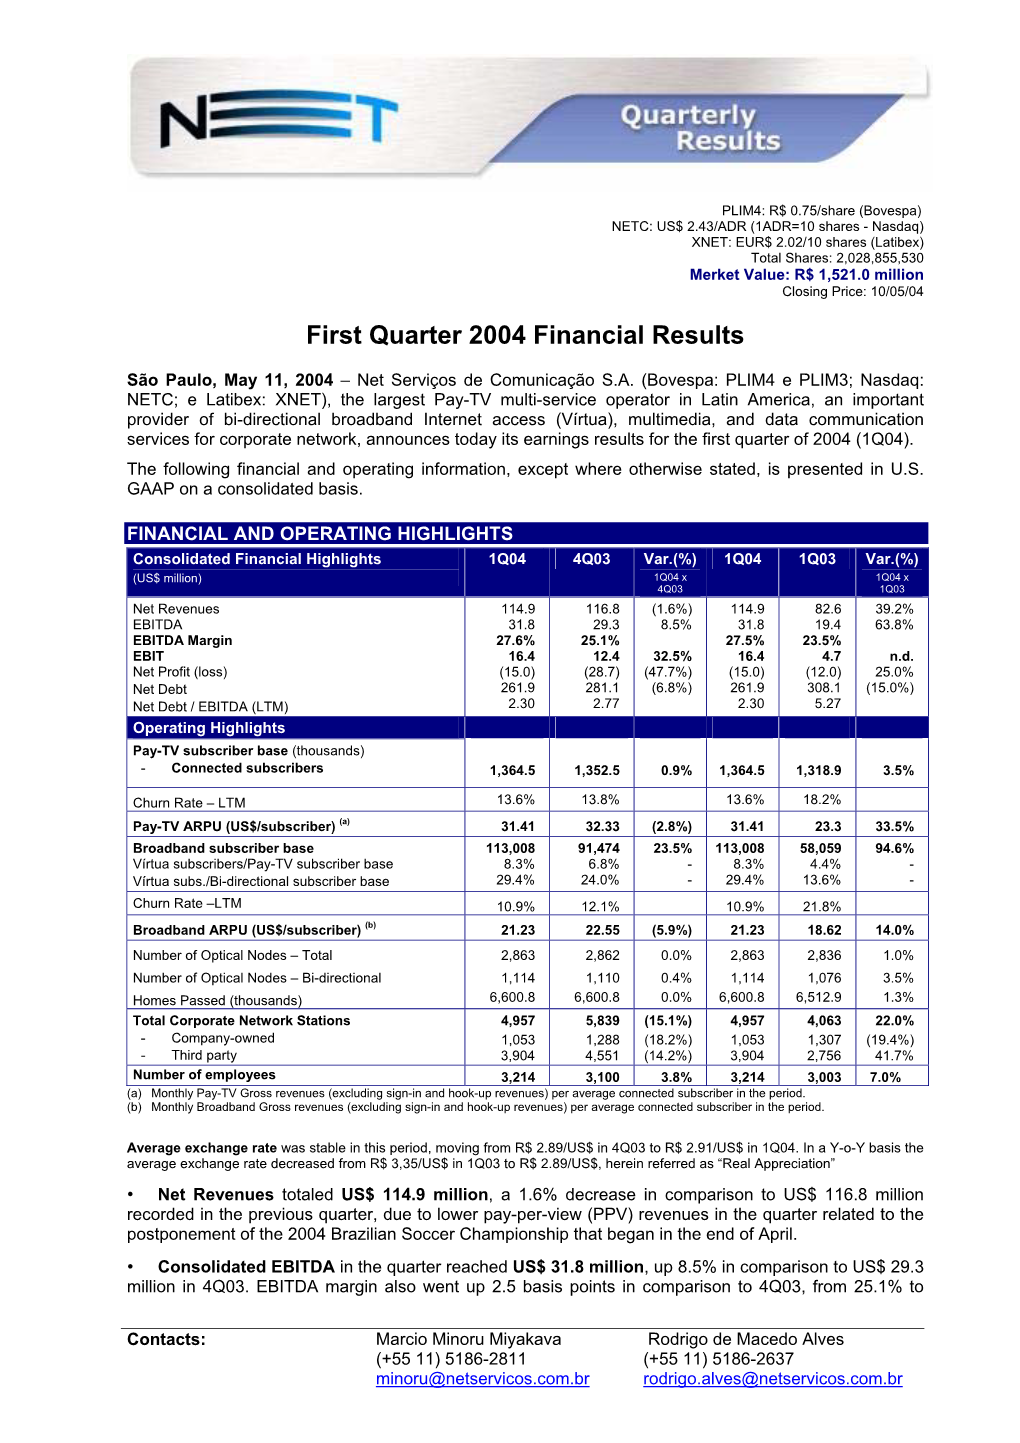 First Quarter 2004 Financial Results